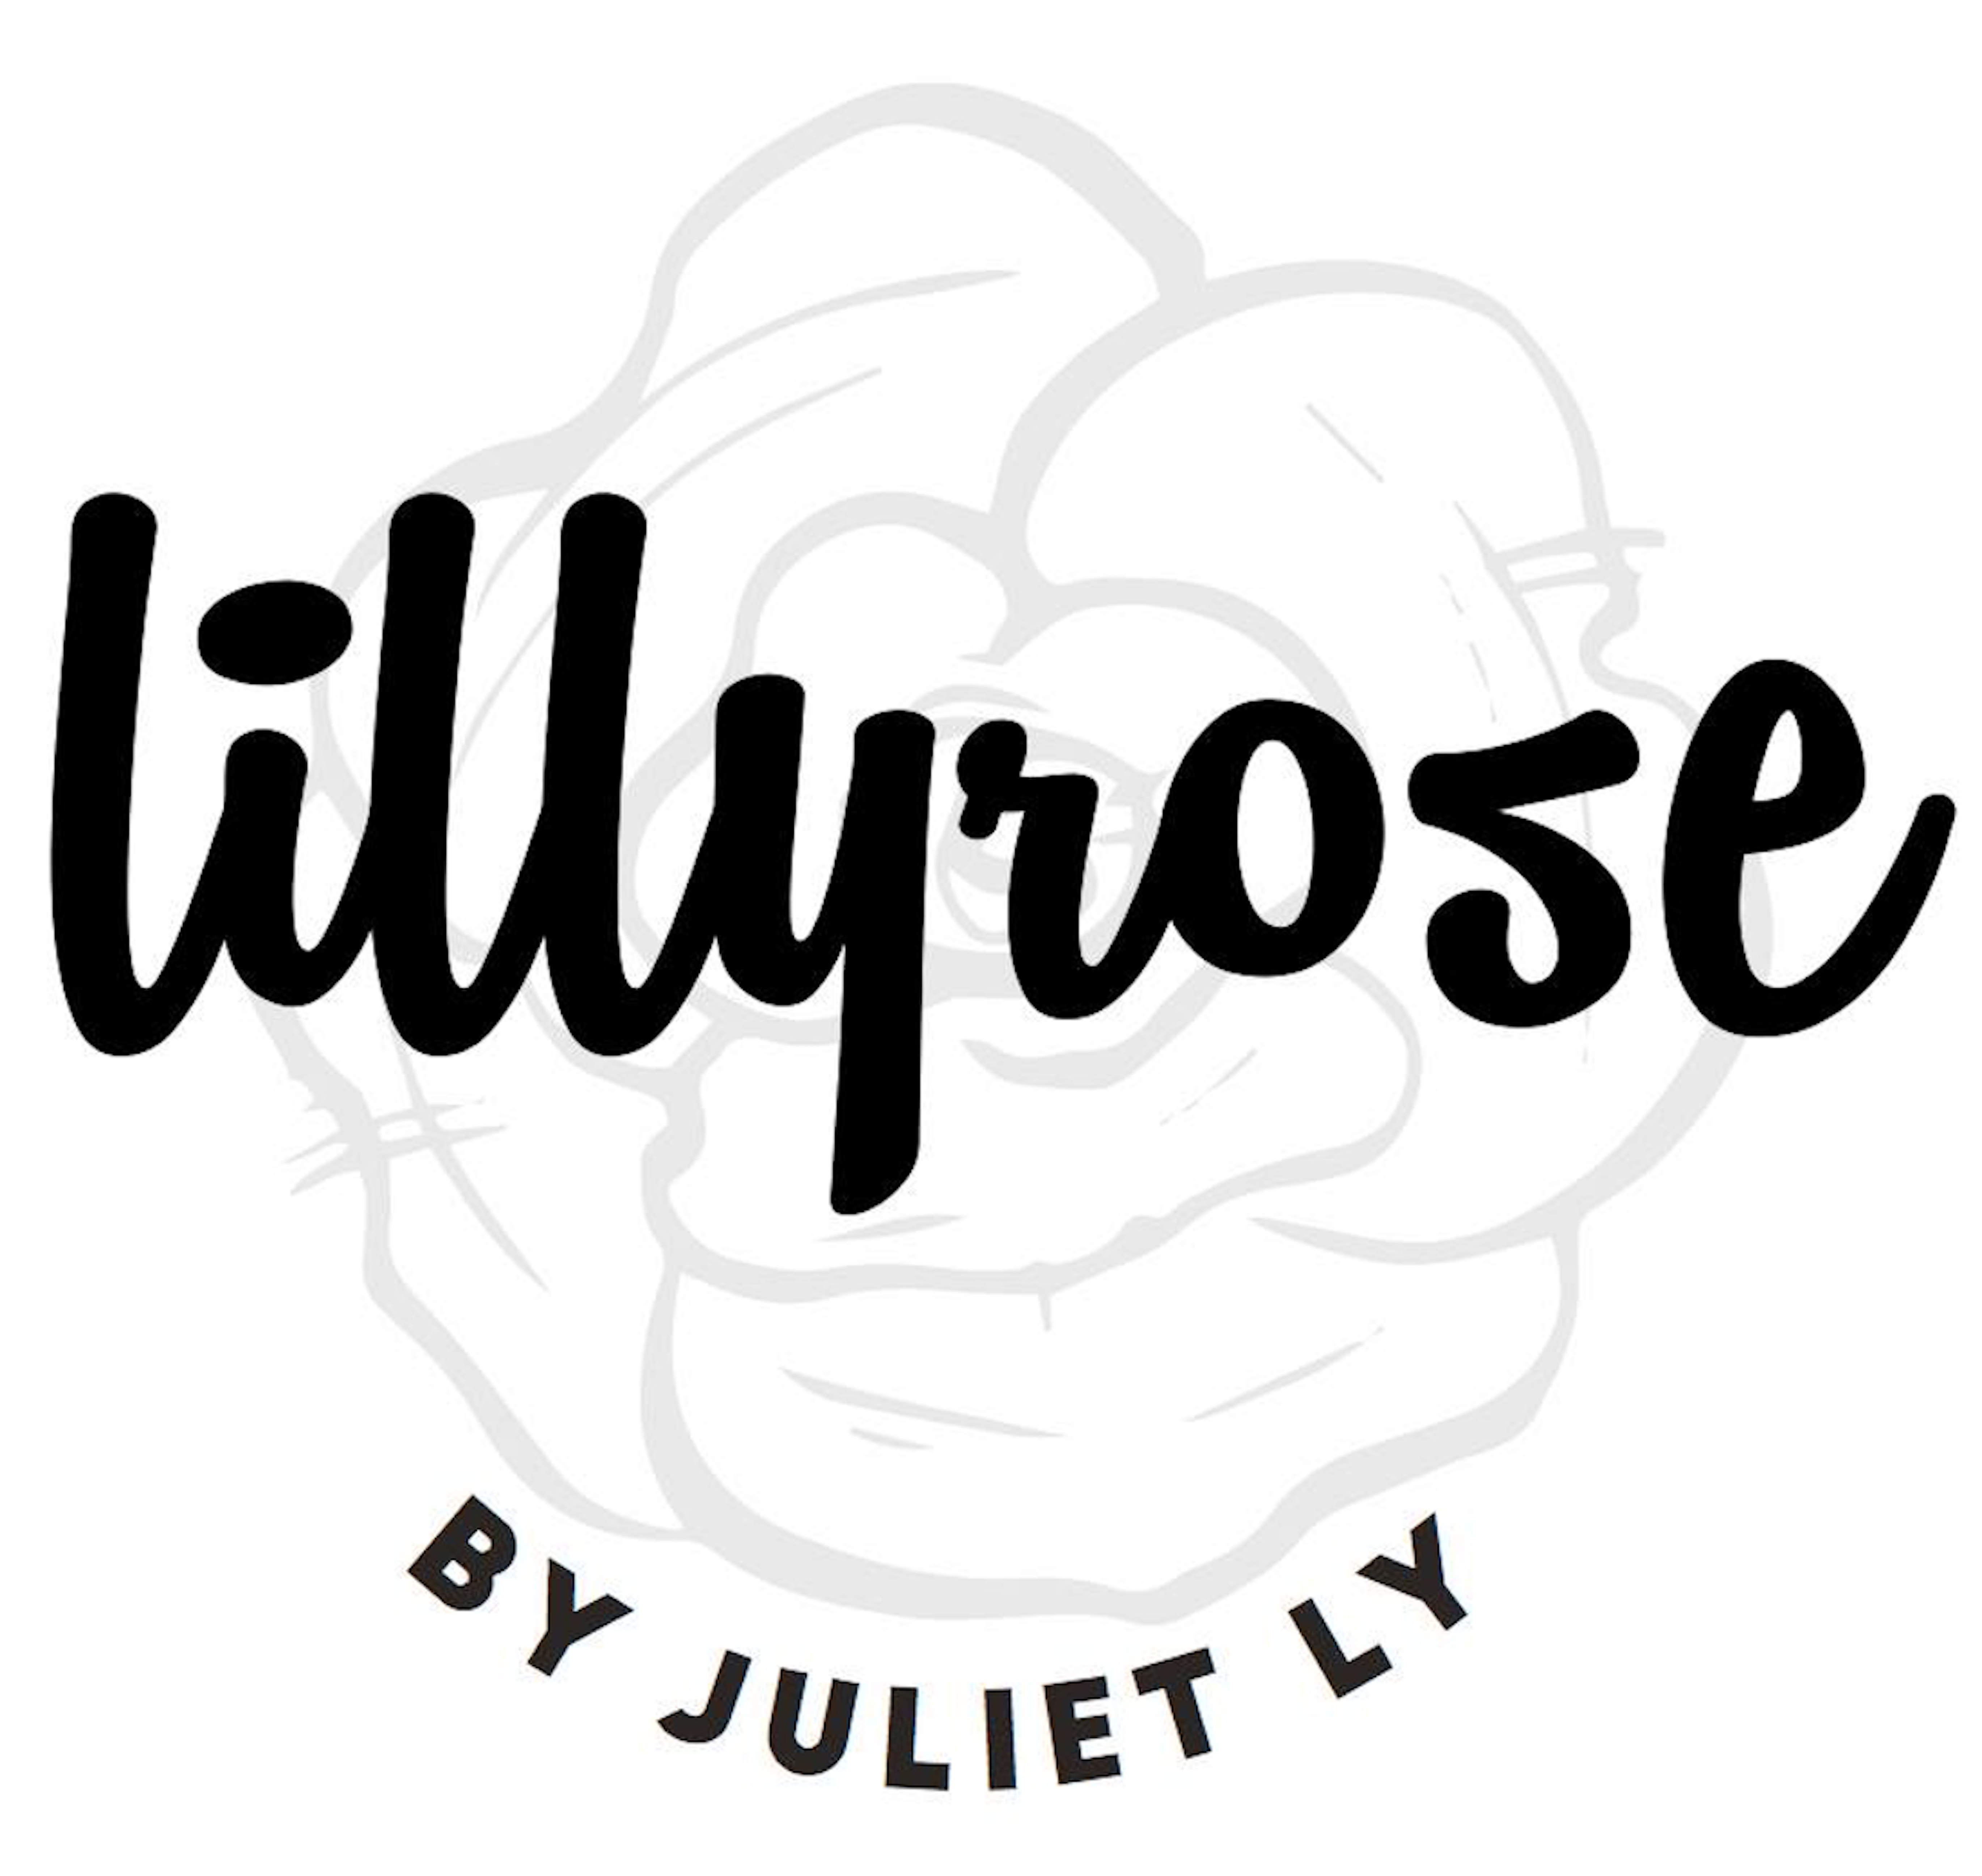 Welcome to LillyRose By Juliet Ly- julietlylillyrose